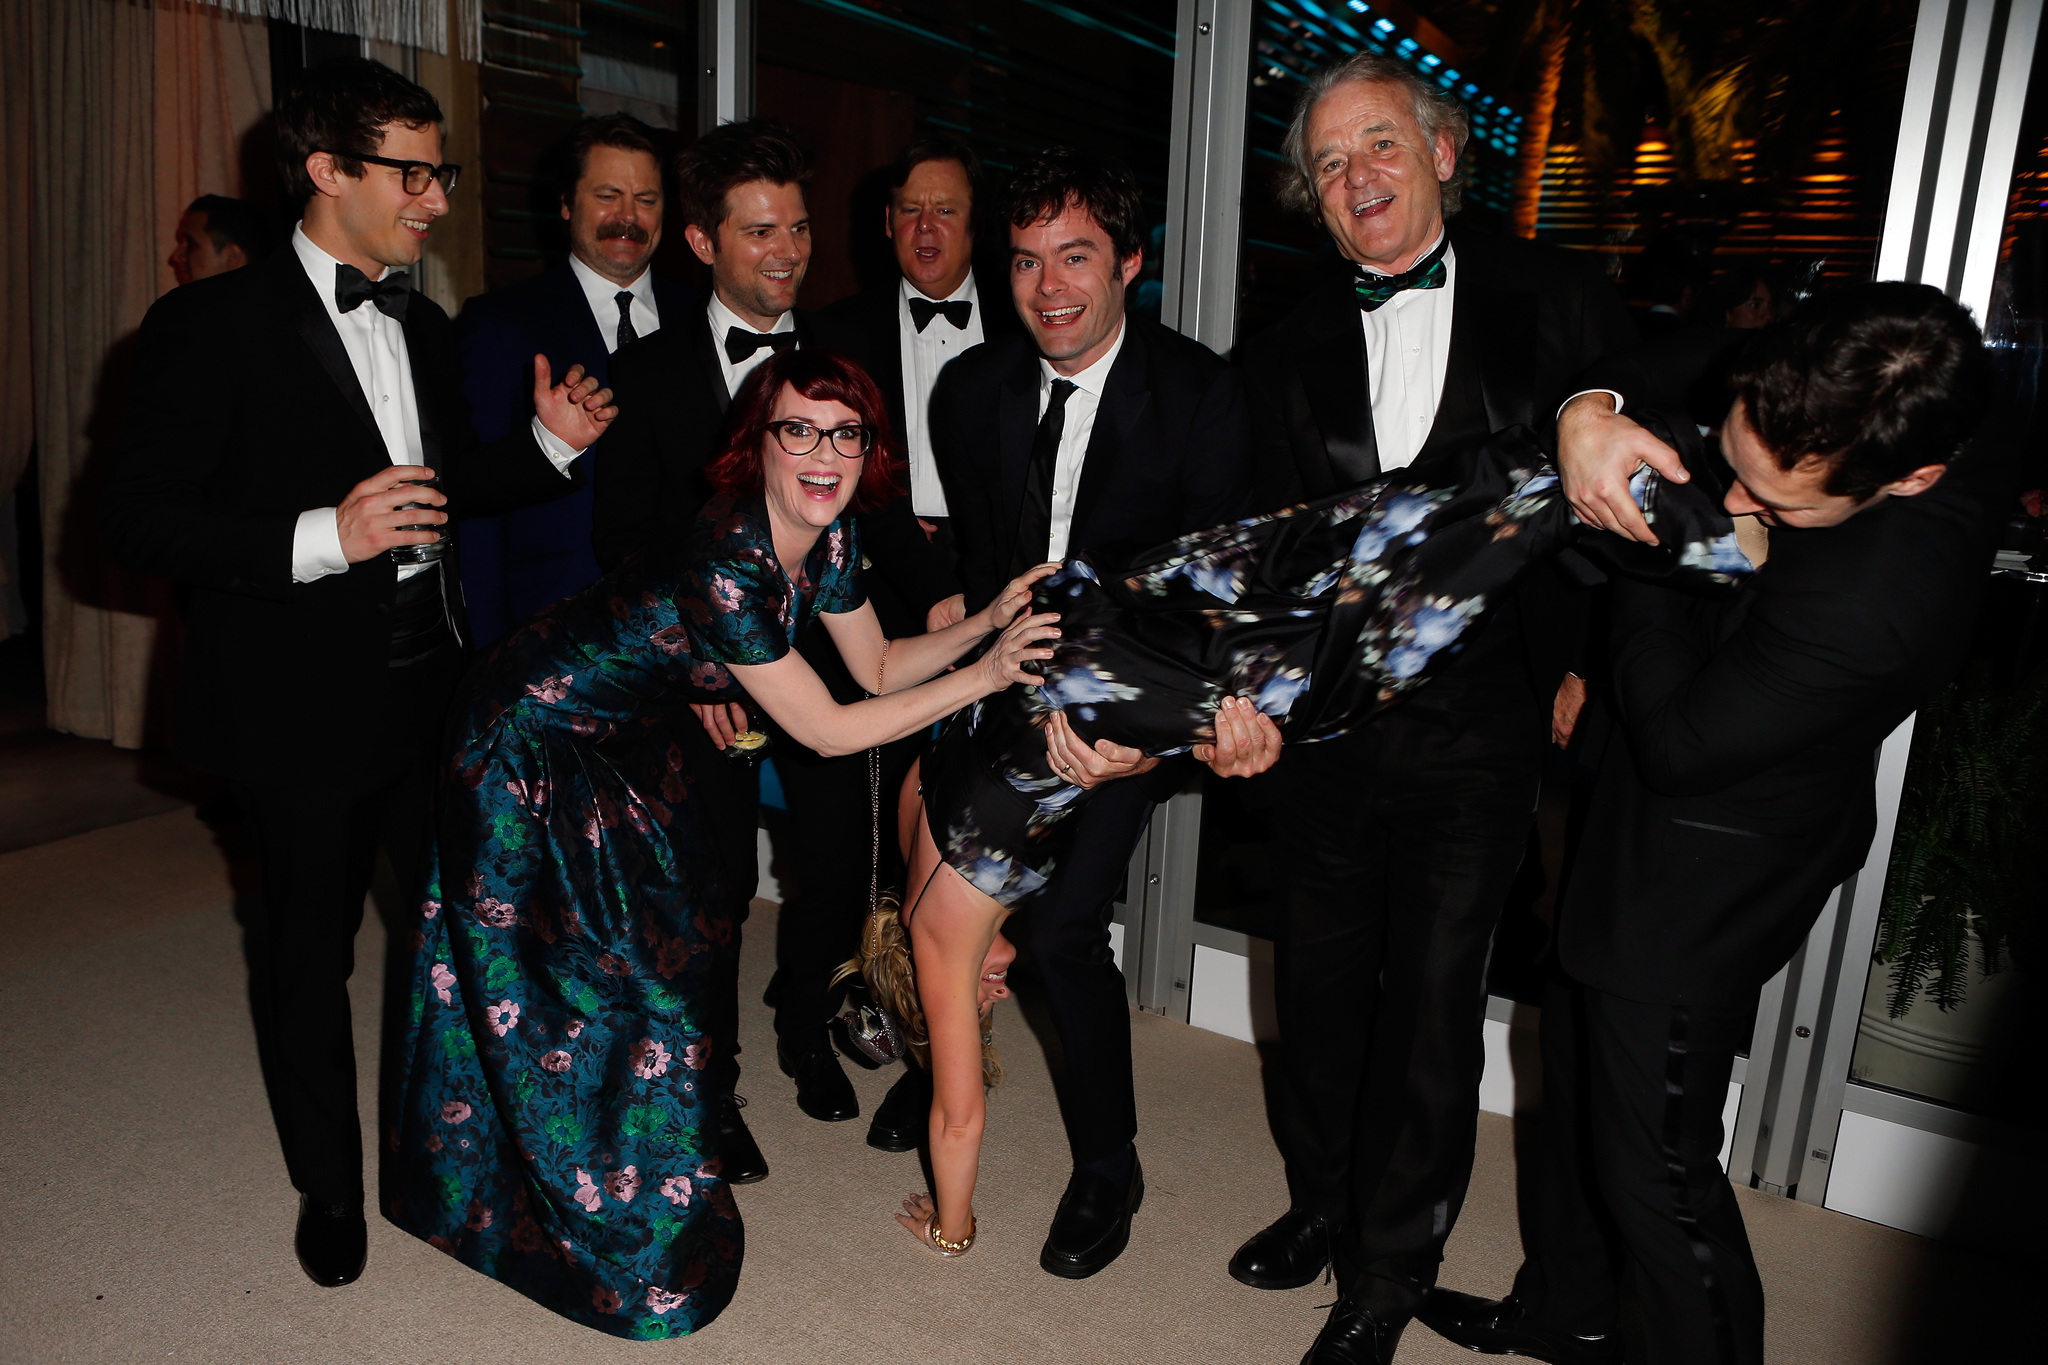 Andy Samberg, Nick Offerman, Adam Scott, Megan Mullally, Brian Doyle Murray, Bill Hader, Amy Poehler (performing handstand), Bill Murray, and Paul Rudd attend the 2014 Vanity Fair Oscar Party Hosted By Graydon Carter on March 2, 2014 in West Hollywood, California.